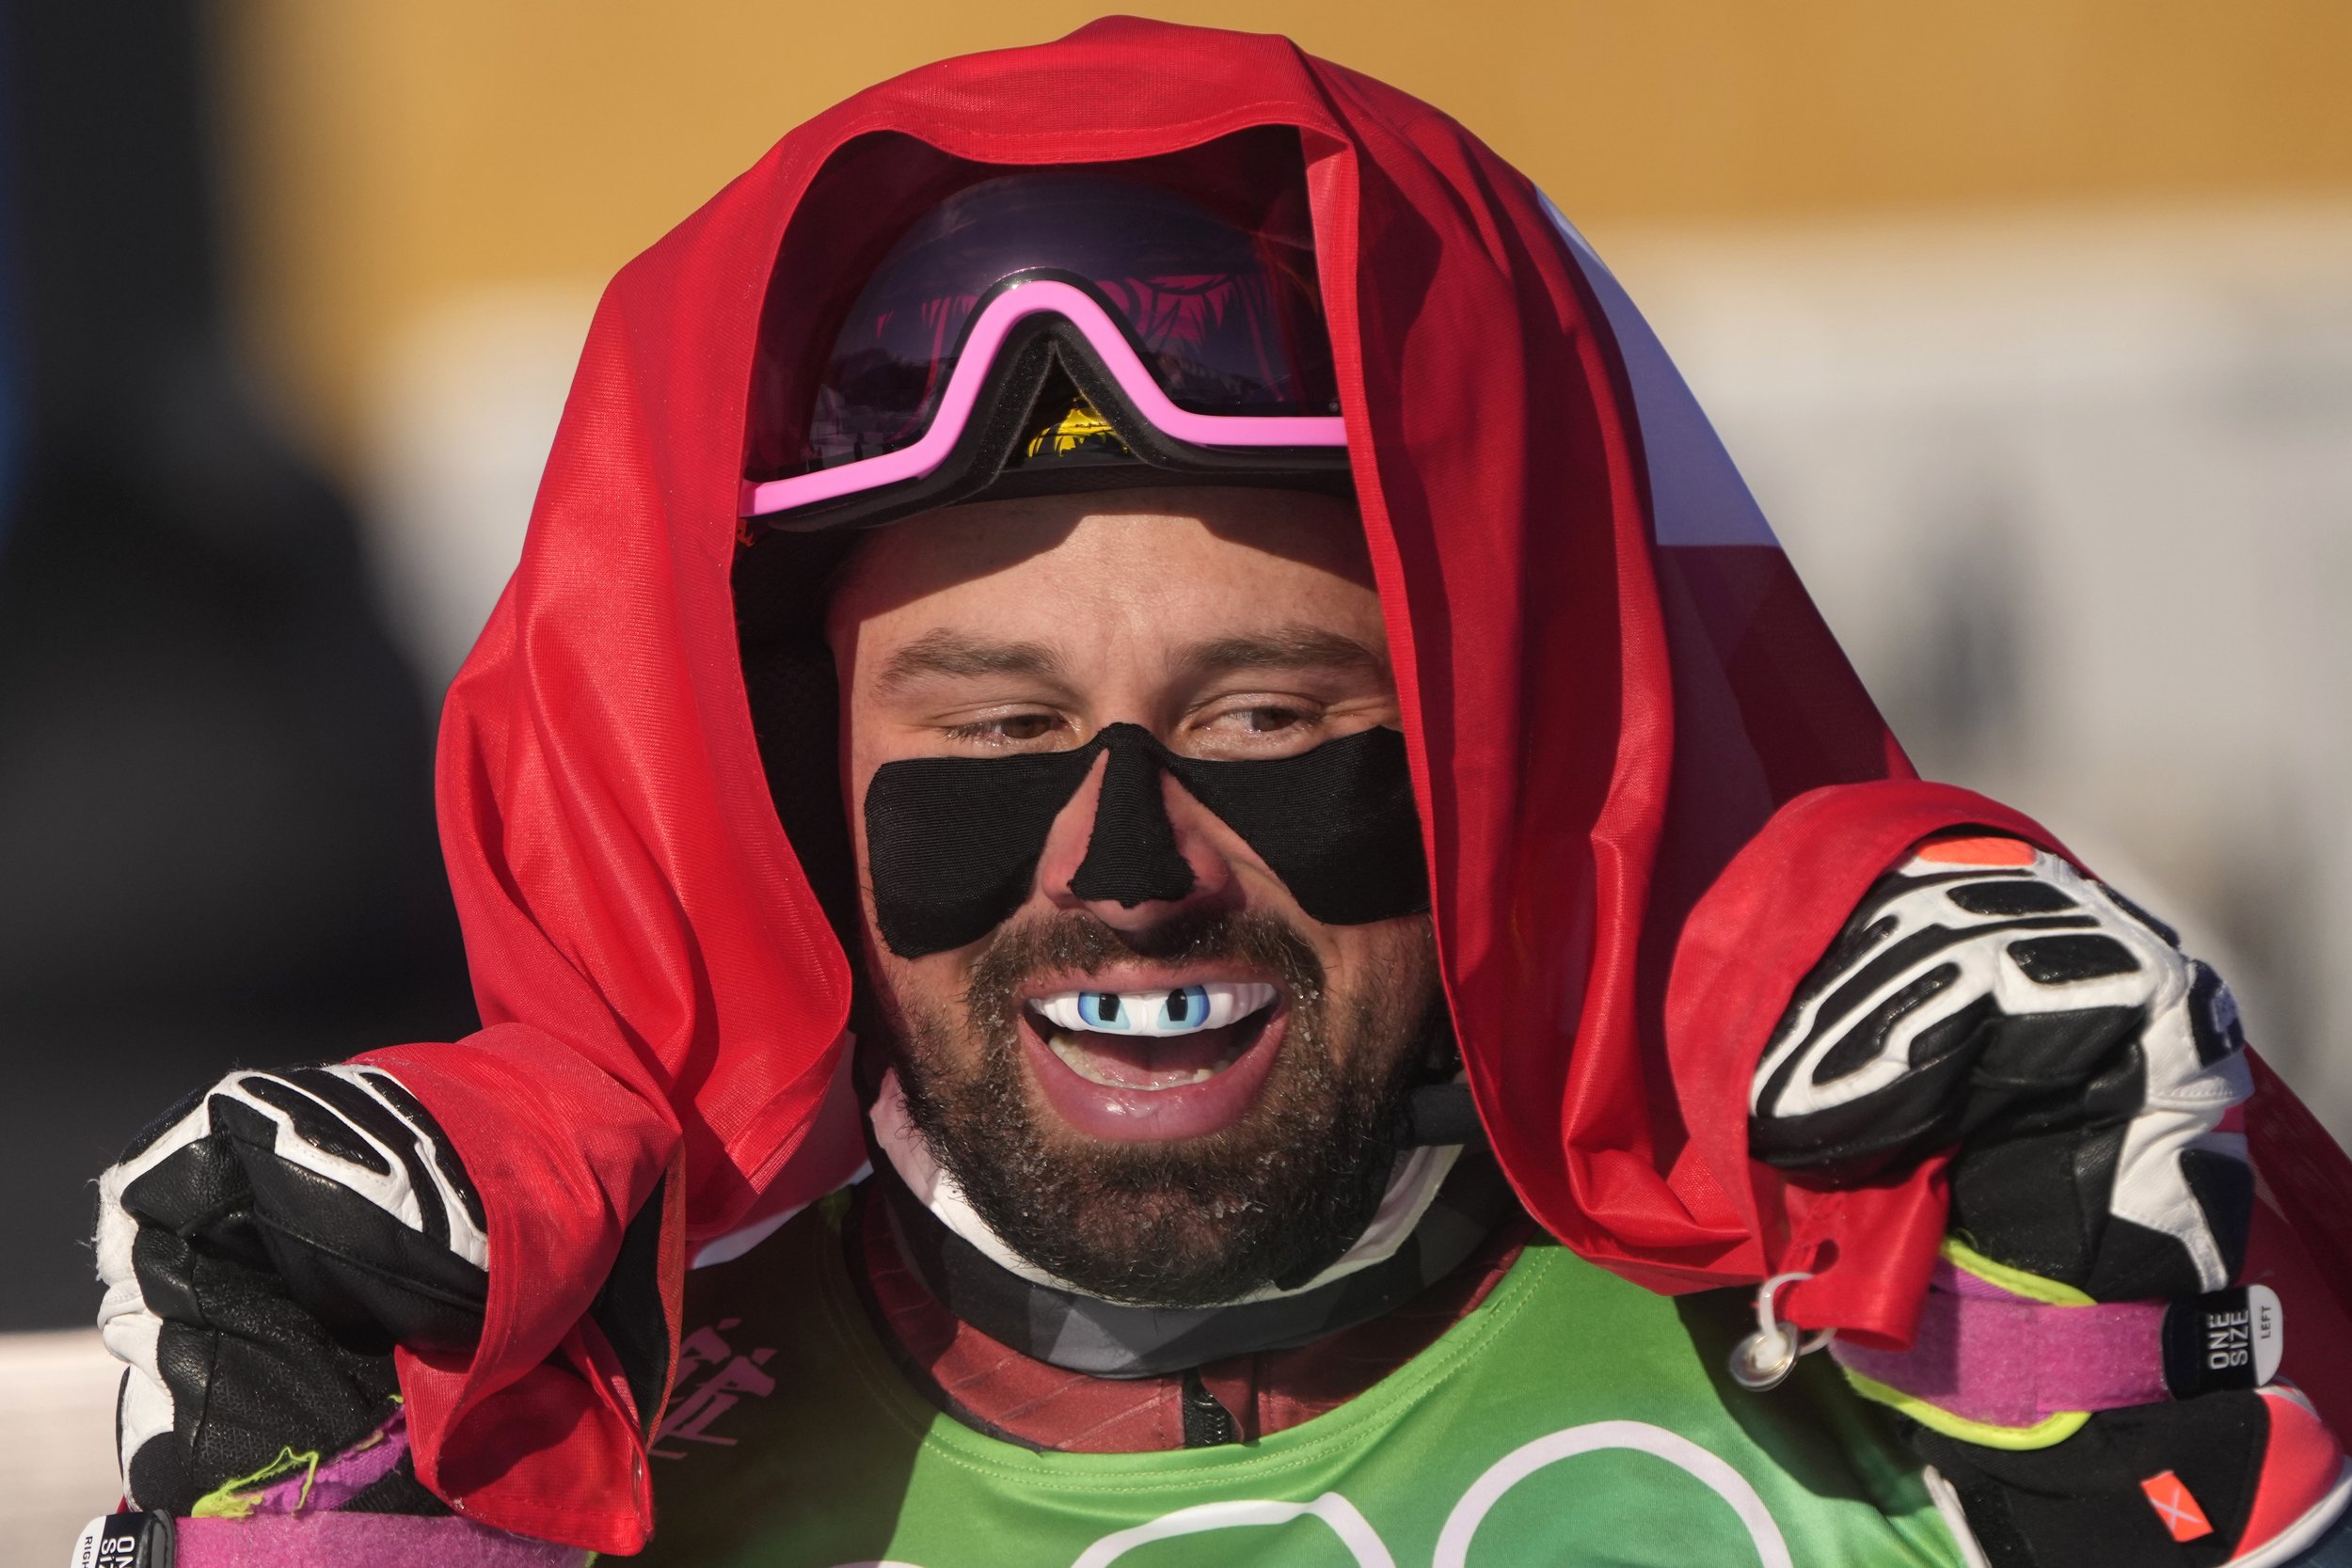  Switzerland's Ryan Regez celebrates after winning a gold medal in the men's cross at the 2022 Winter Olympics, Friday, Feb. 18, 2022, in Zhangjiakou, China. (AP Photo/Francisco Seco) 